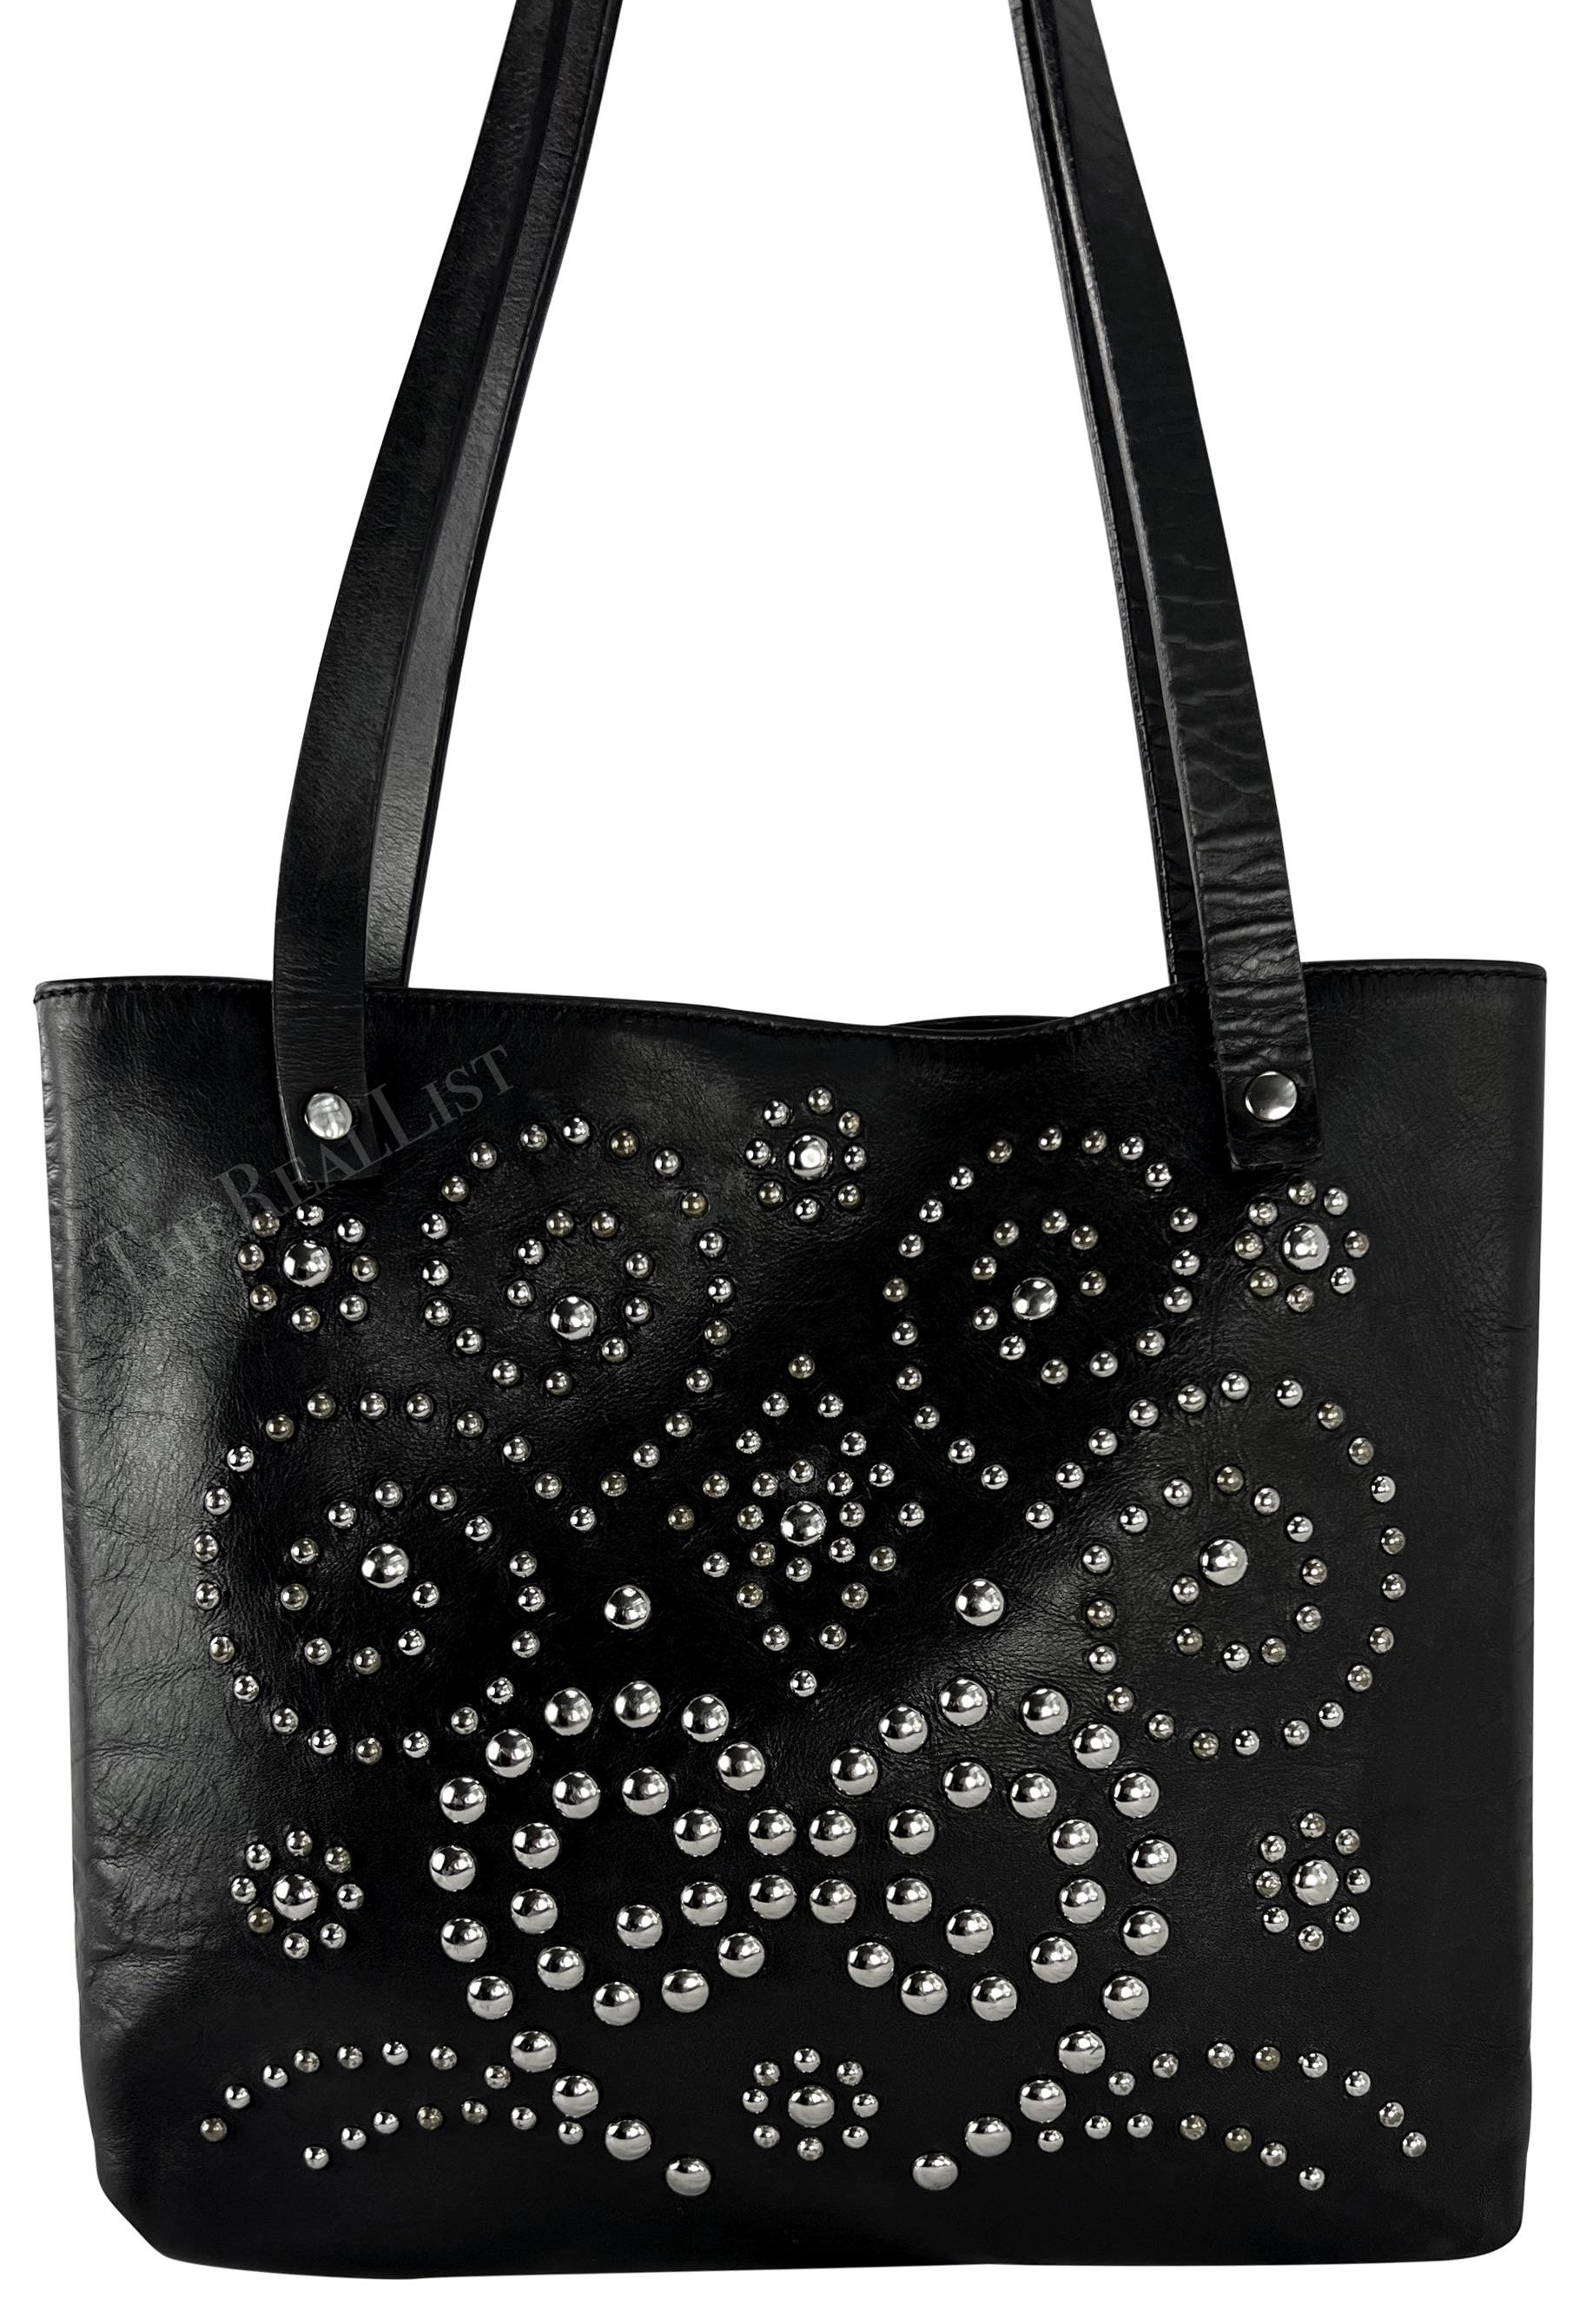 A chic black leather studded Dolce & Gabbana tote from the late 1990s. This small black leather tote features elevated style with silver studs arranged in an scrolling pattern. The perfect elevated take on a closet staple, this small Dolce & Gabbana